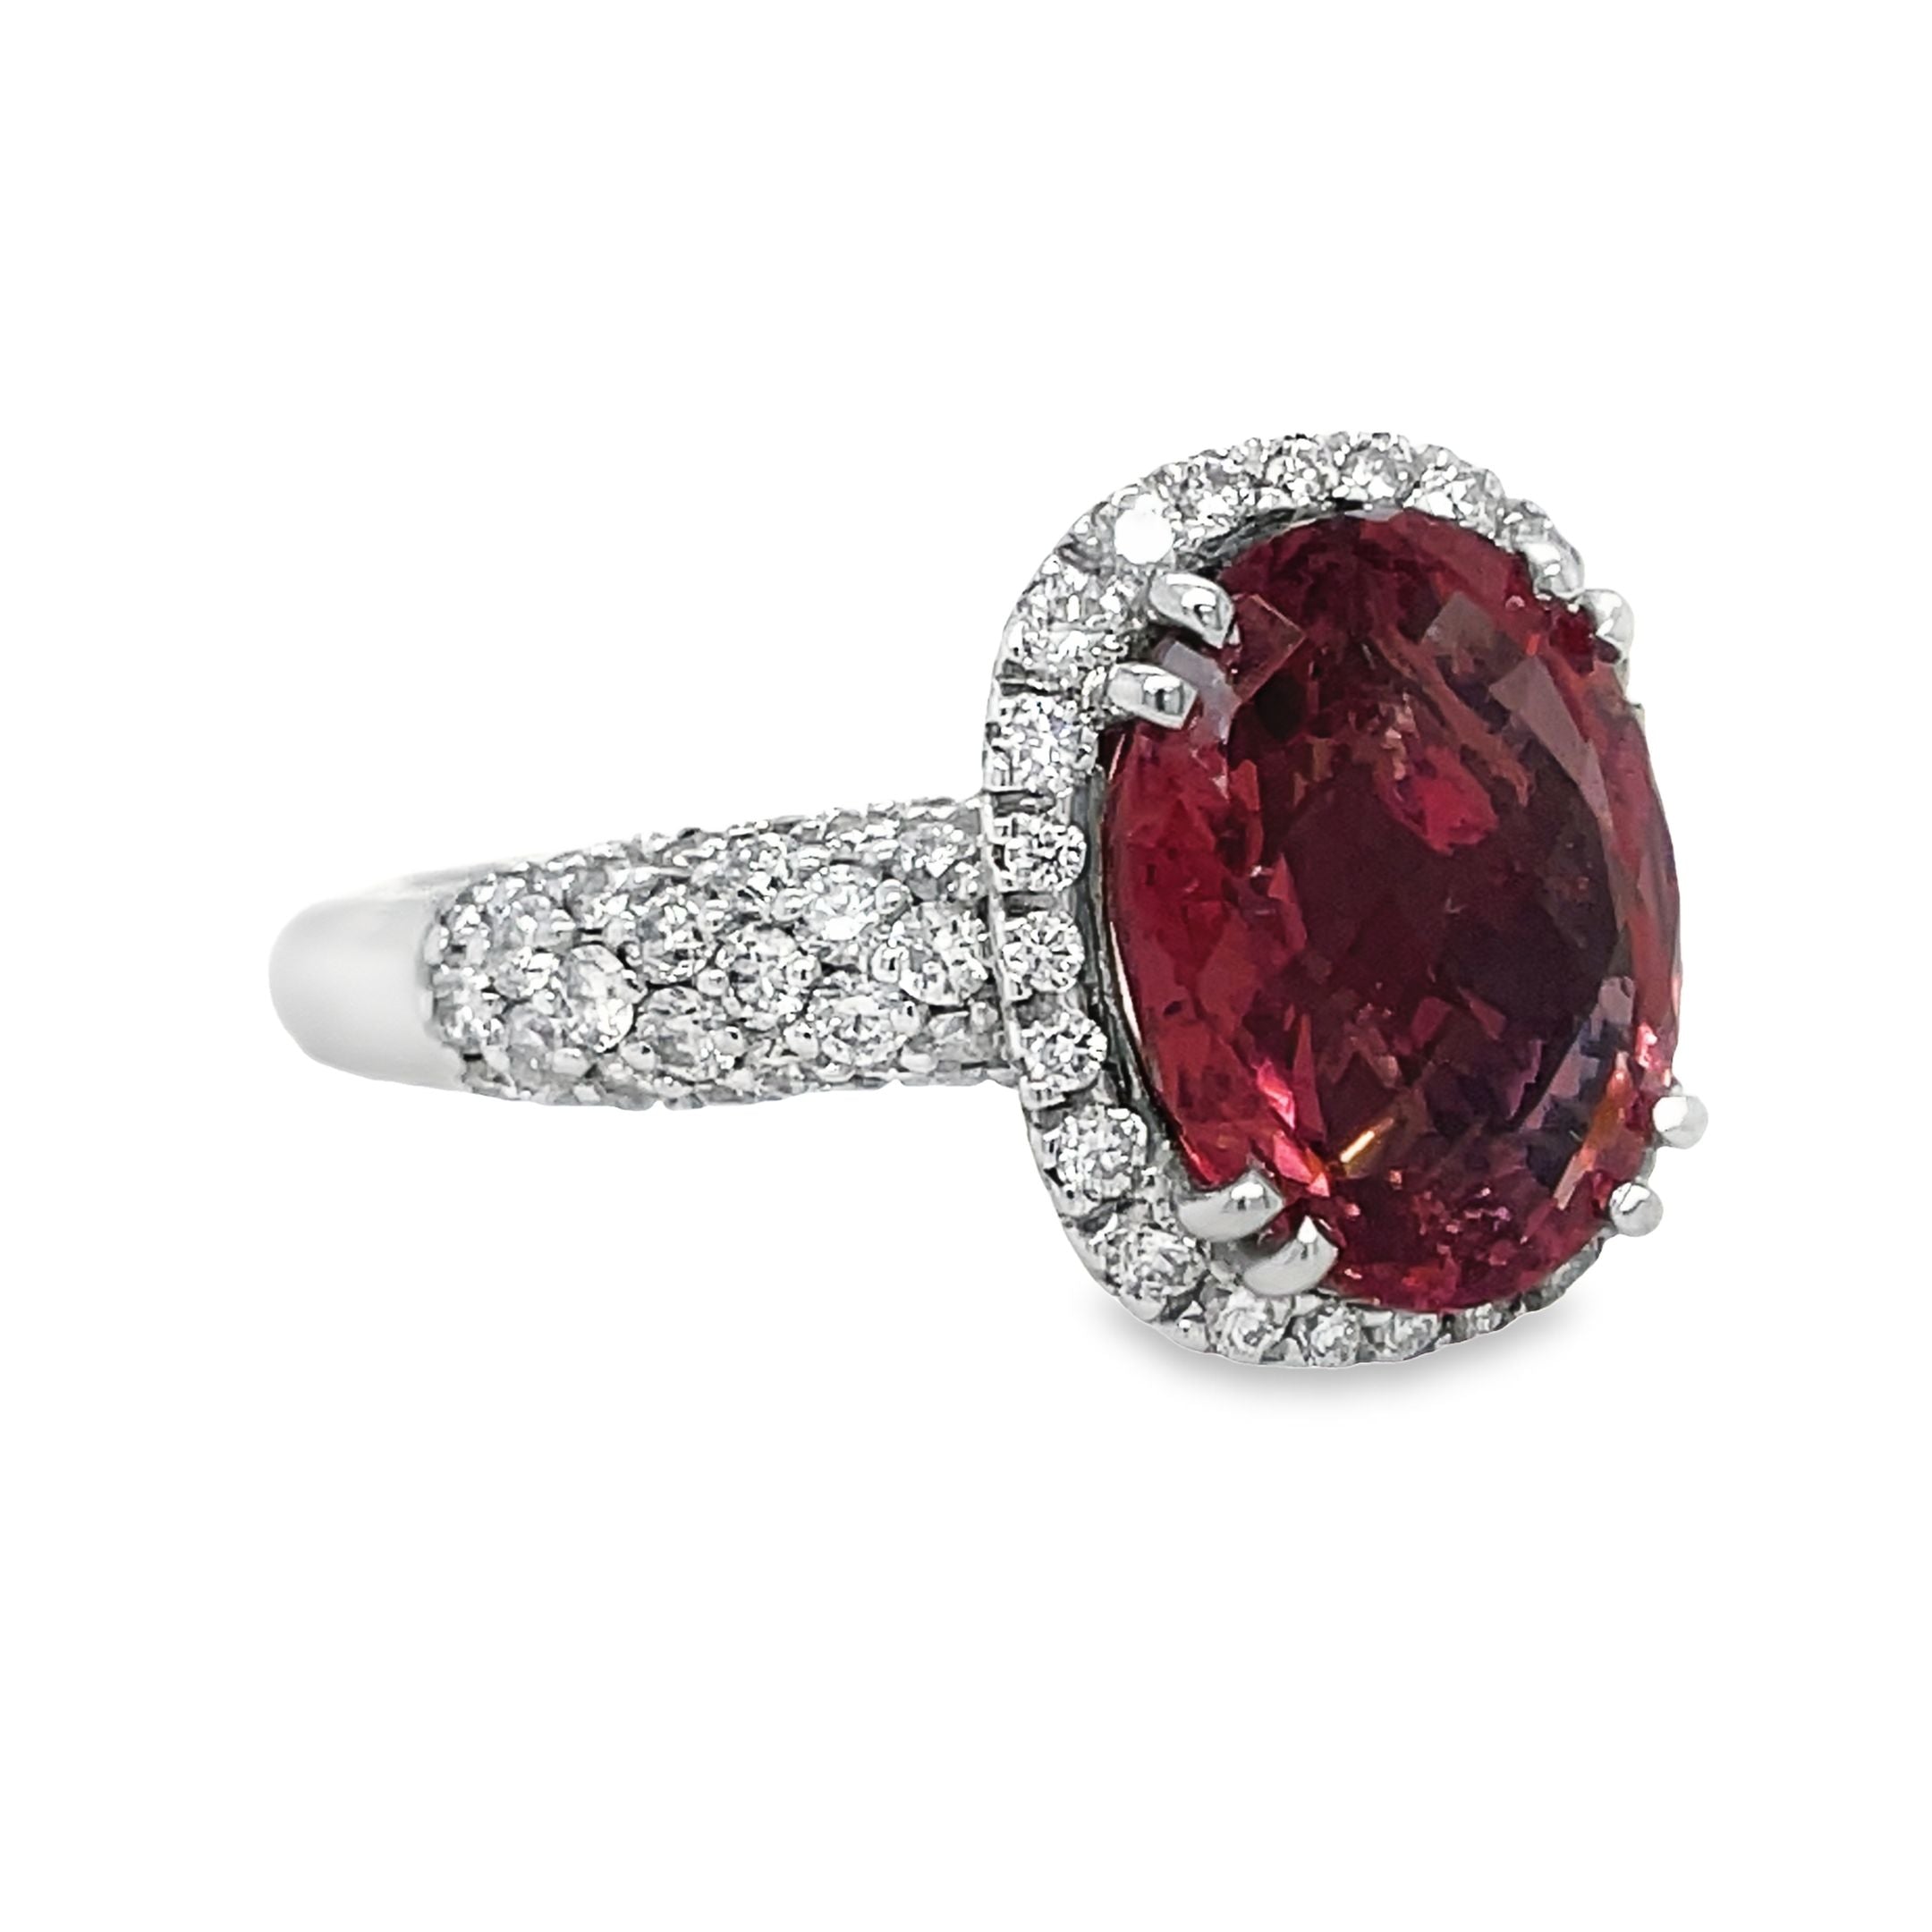 Expertly crafted with a 4.47 carat oval tourmaline and 1.15 carats of diamond pave set in 18k white gold, this ring exudes elegance and luxury. Add a pop of color and sparkle to any outfit with this one-of-a-kind piece.